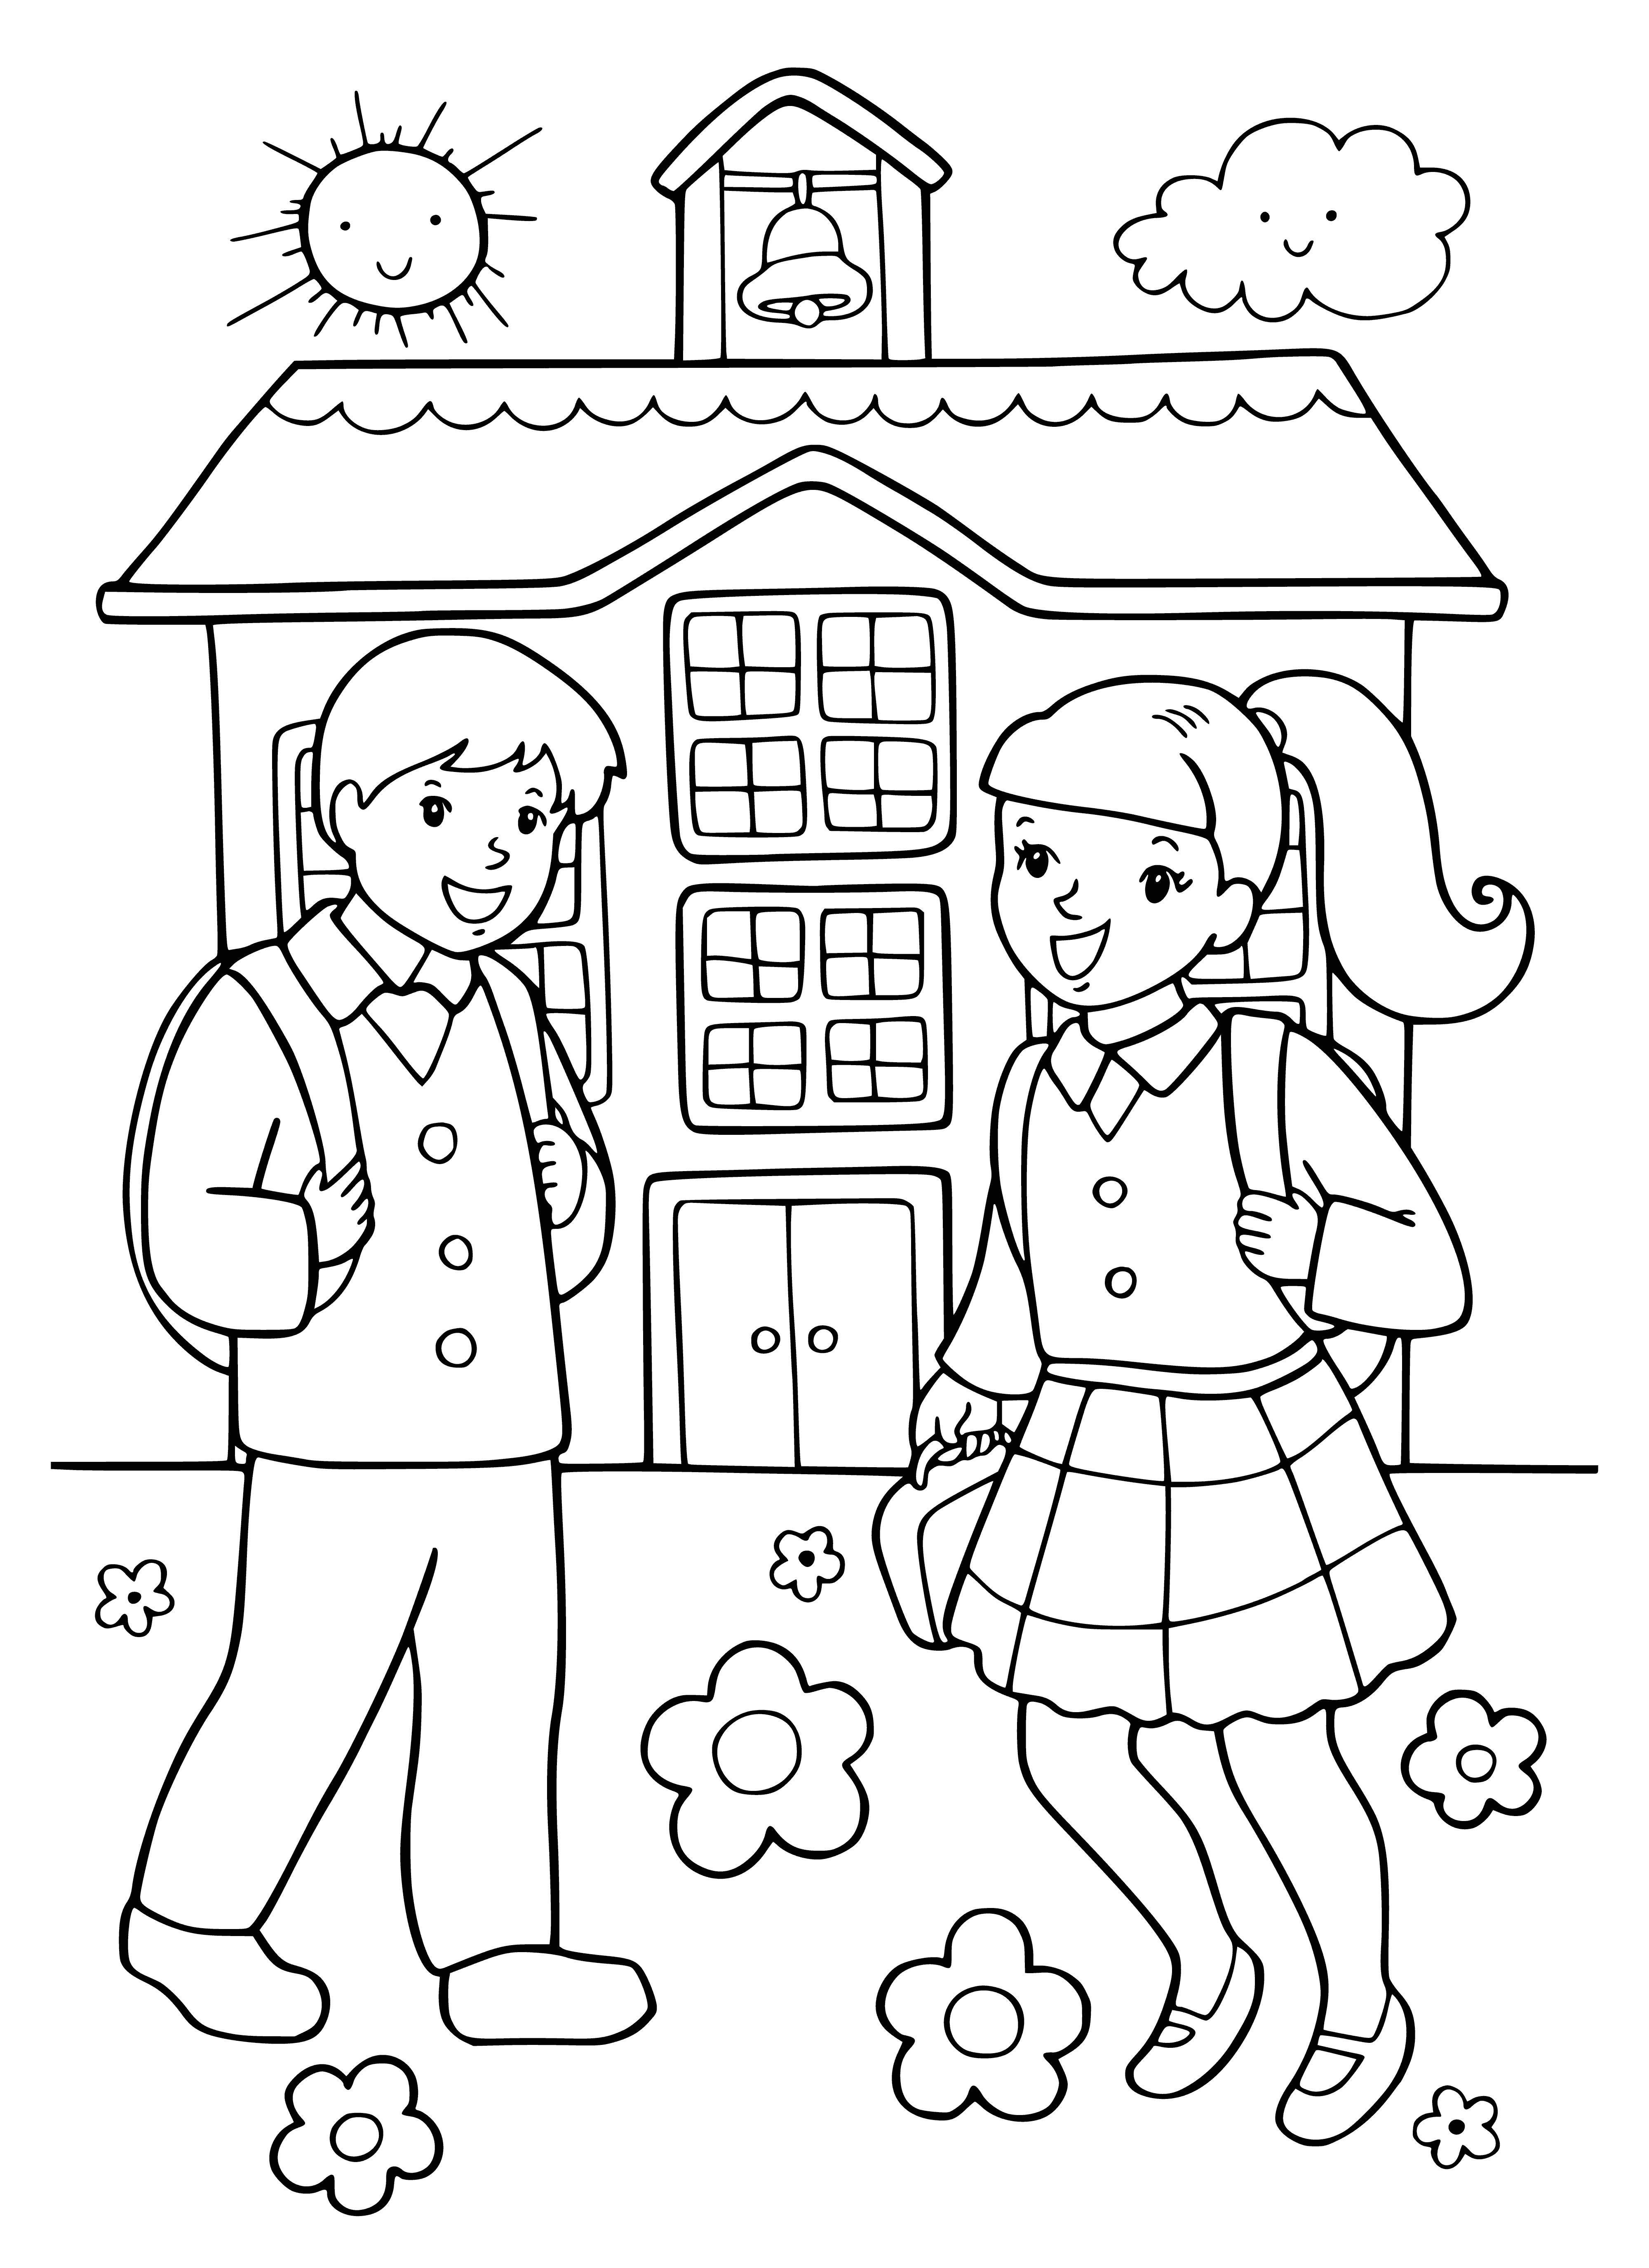 Children at school coloring page